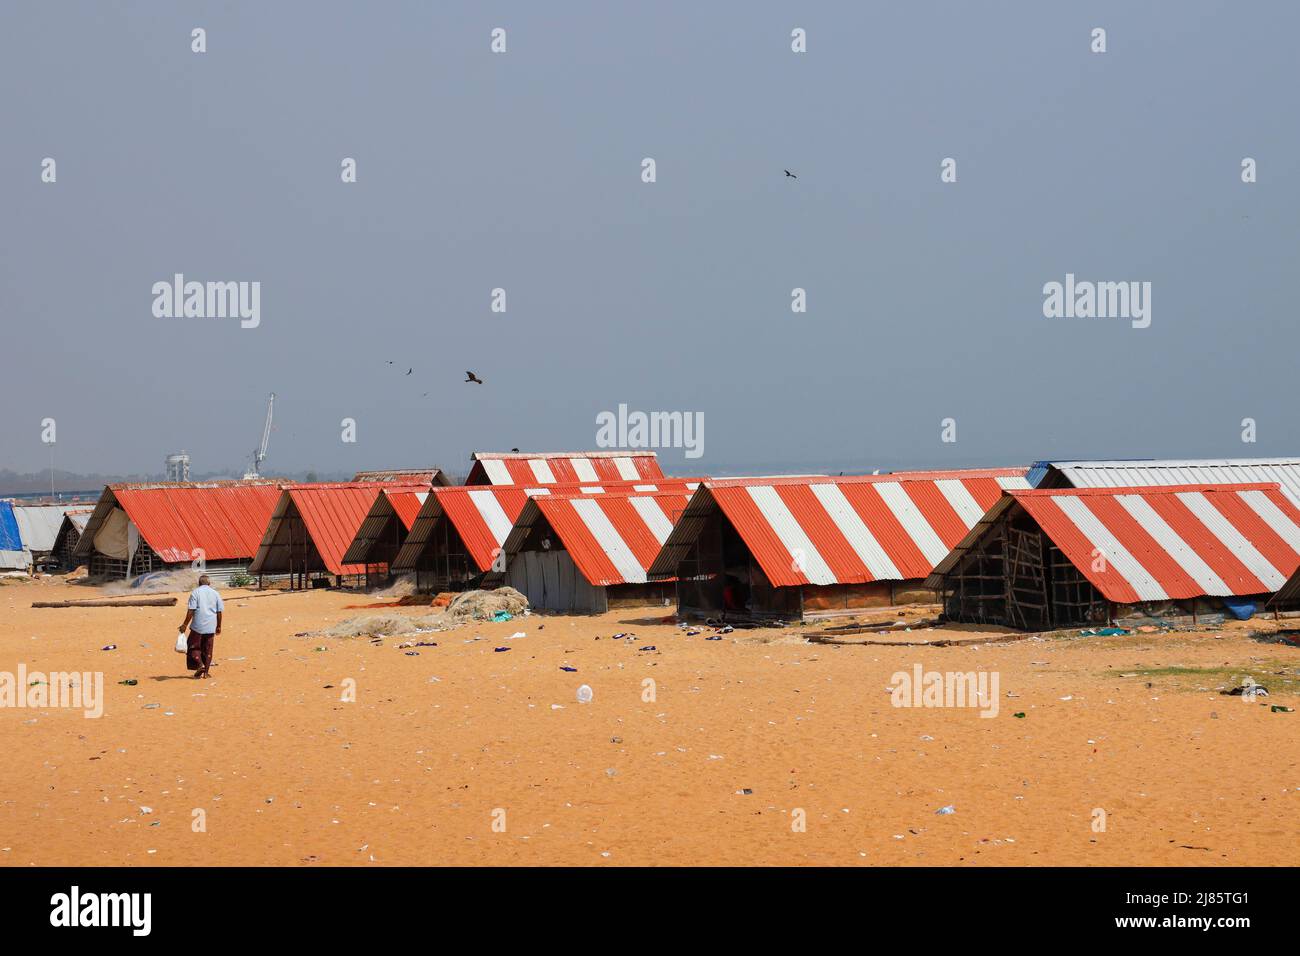 Row of fishermens huts with red and white tin roof, Tangassery, Thangassery, Kerala, India Stock Photo